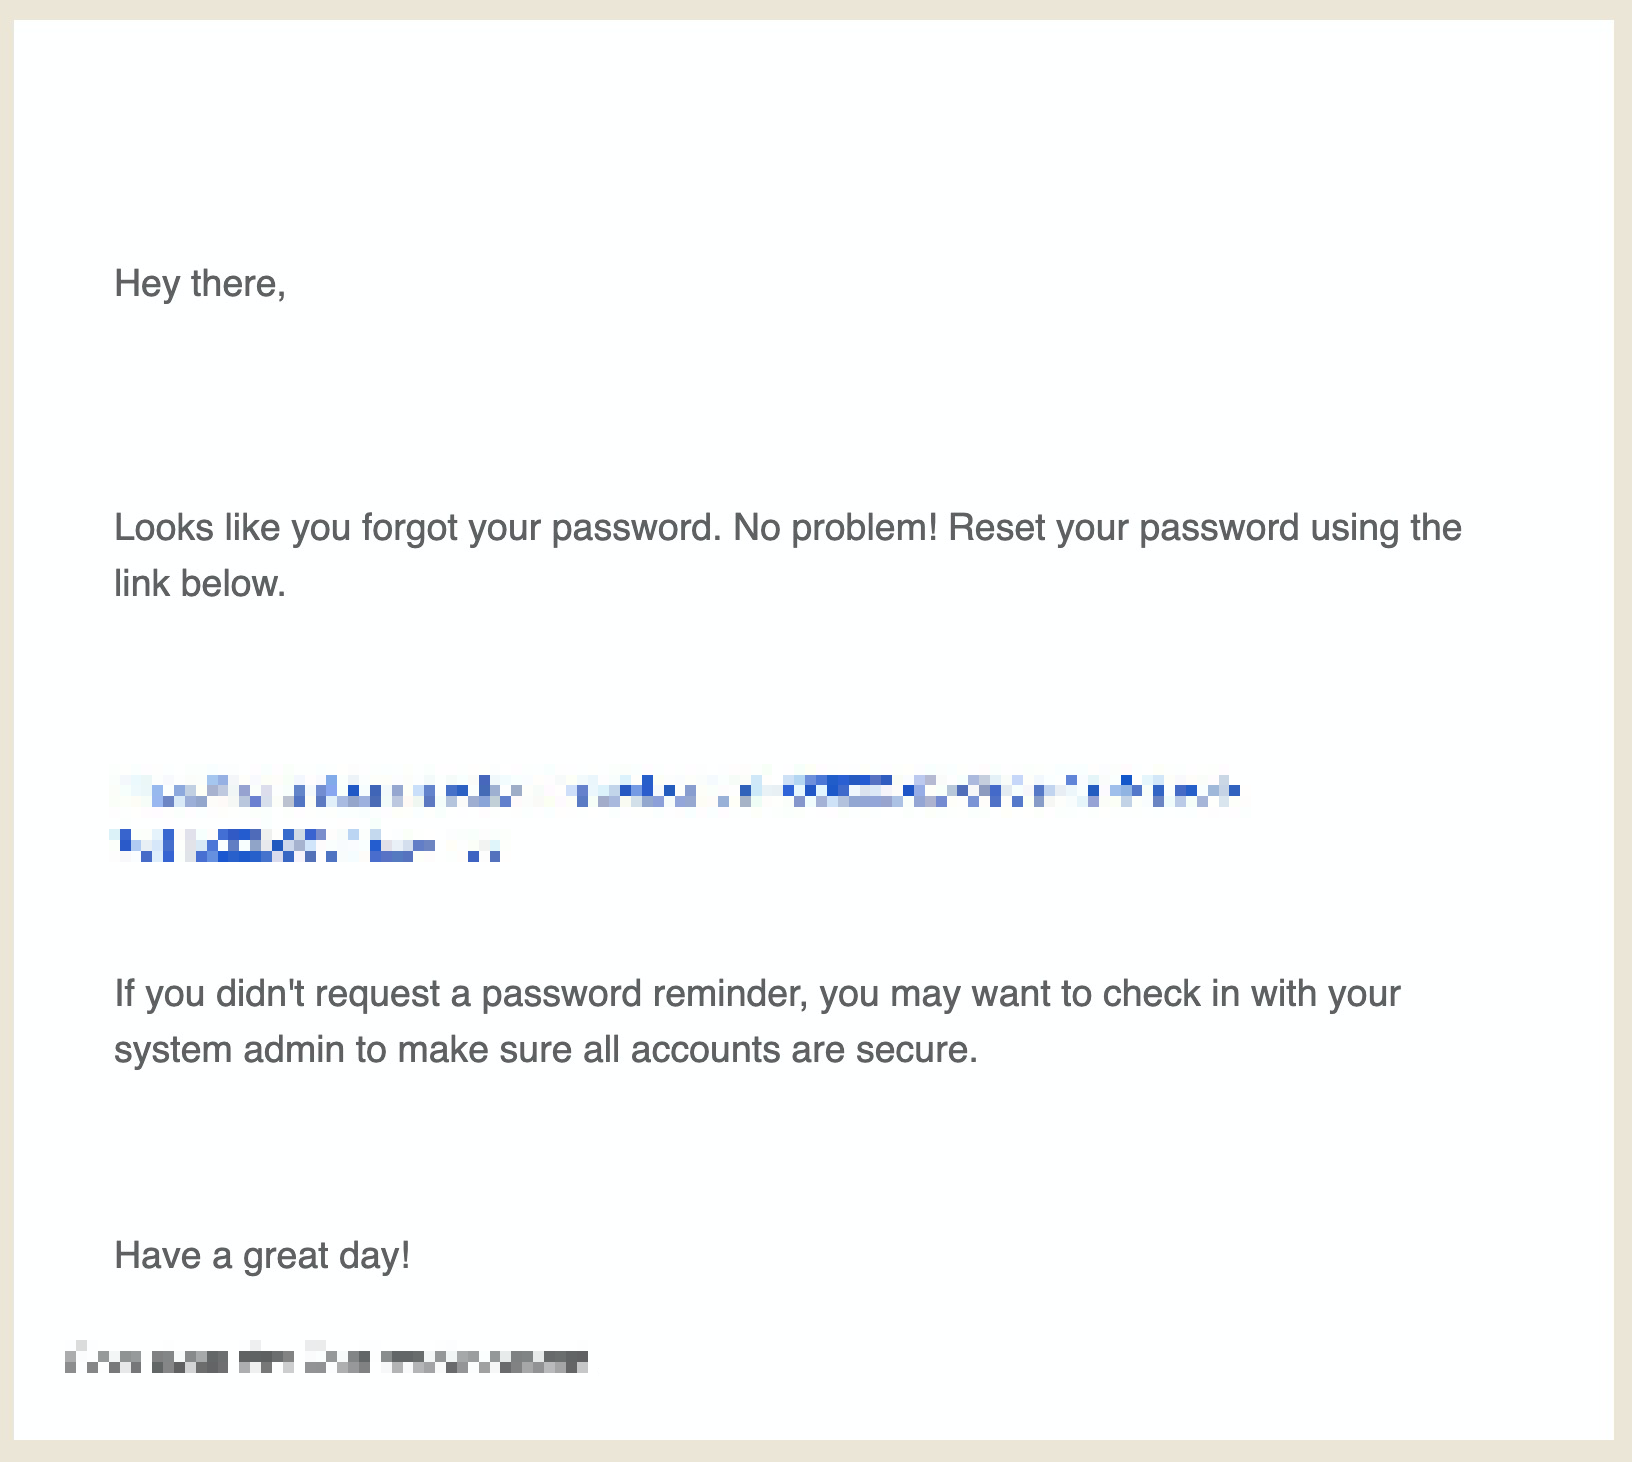 Engage_Reset_Password_Email.jpg